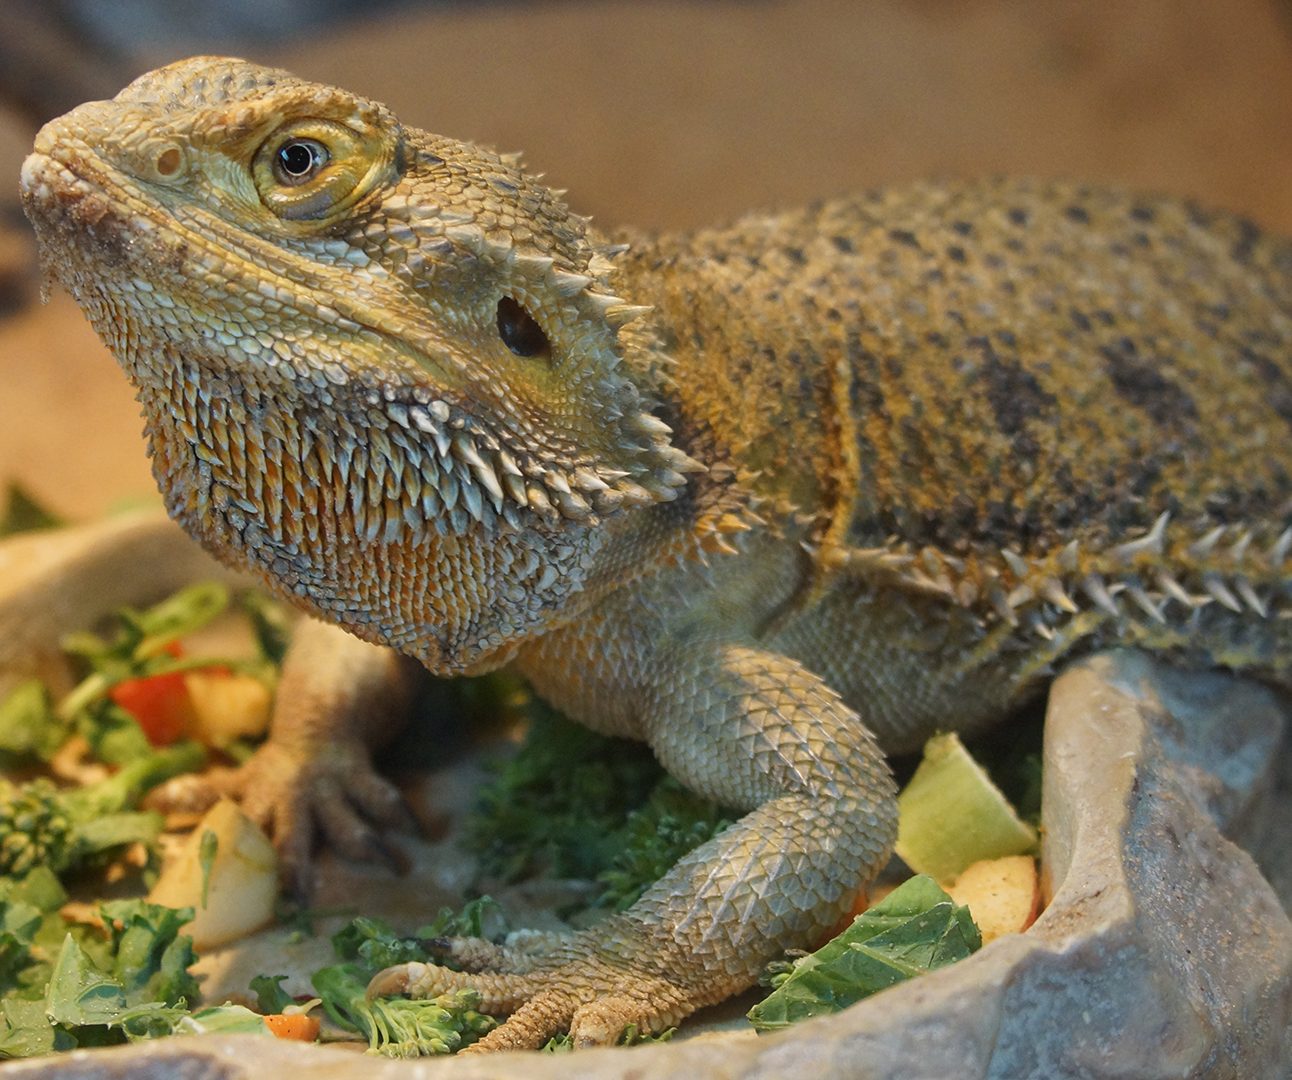 Close up of a bearded dragon sitting on a dish filled with food